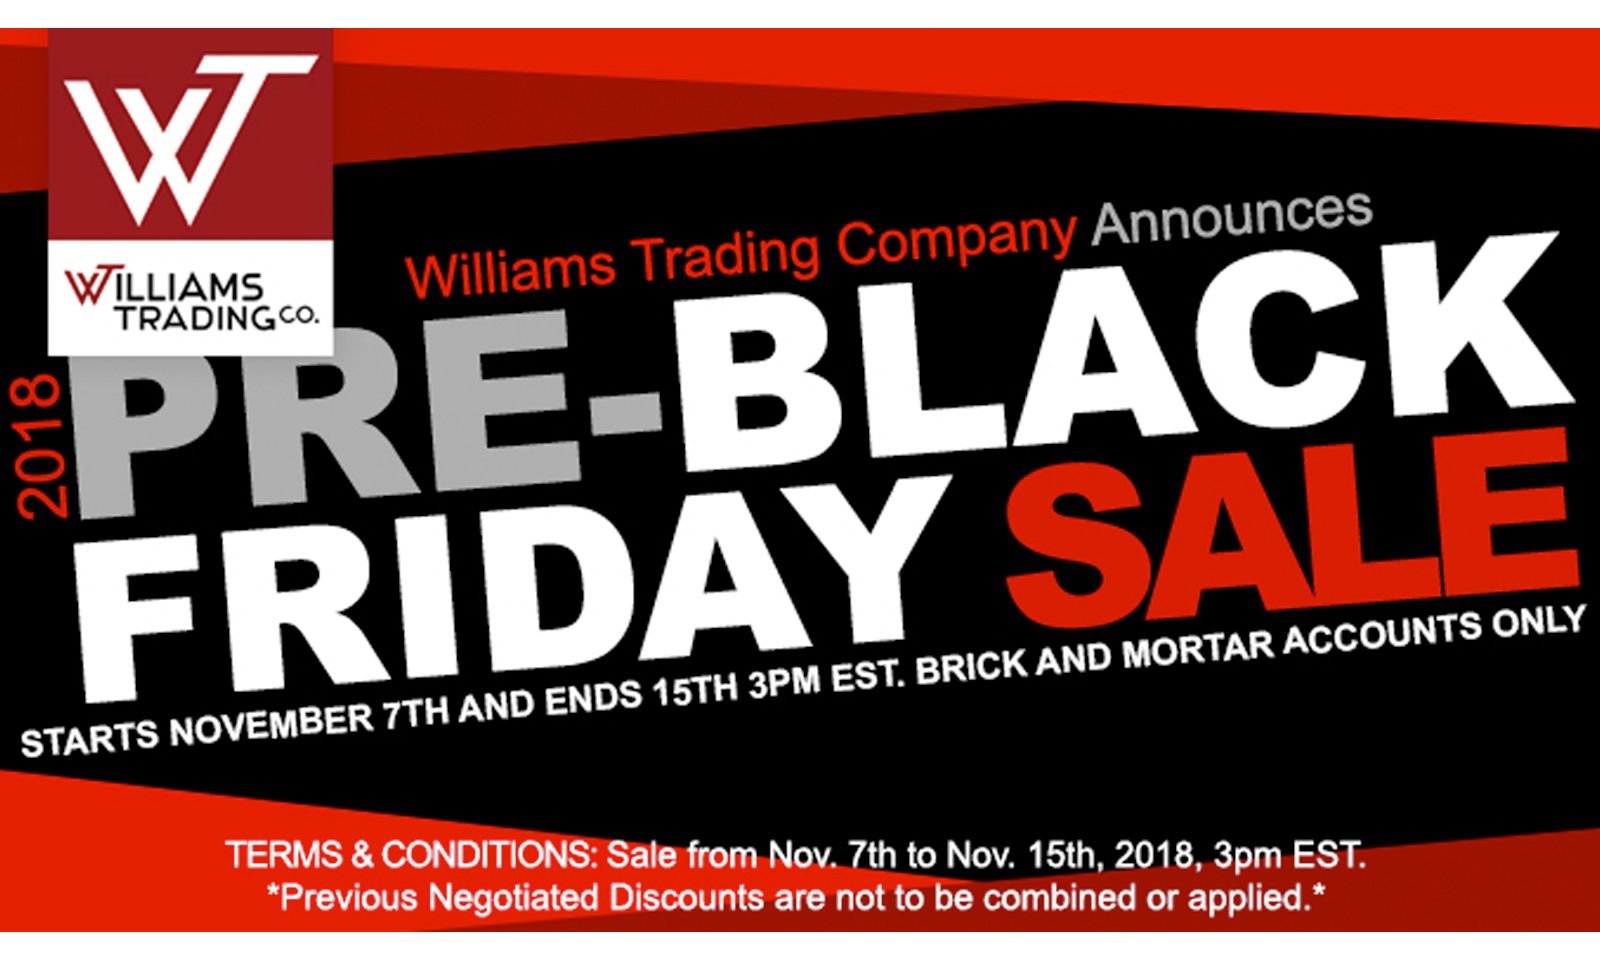 Williams Trading’s Pre-Black Friday Warehouse Sale Coming